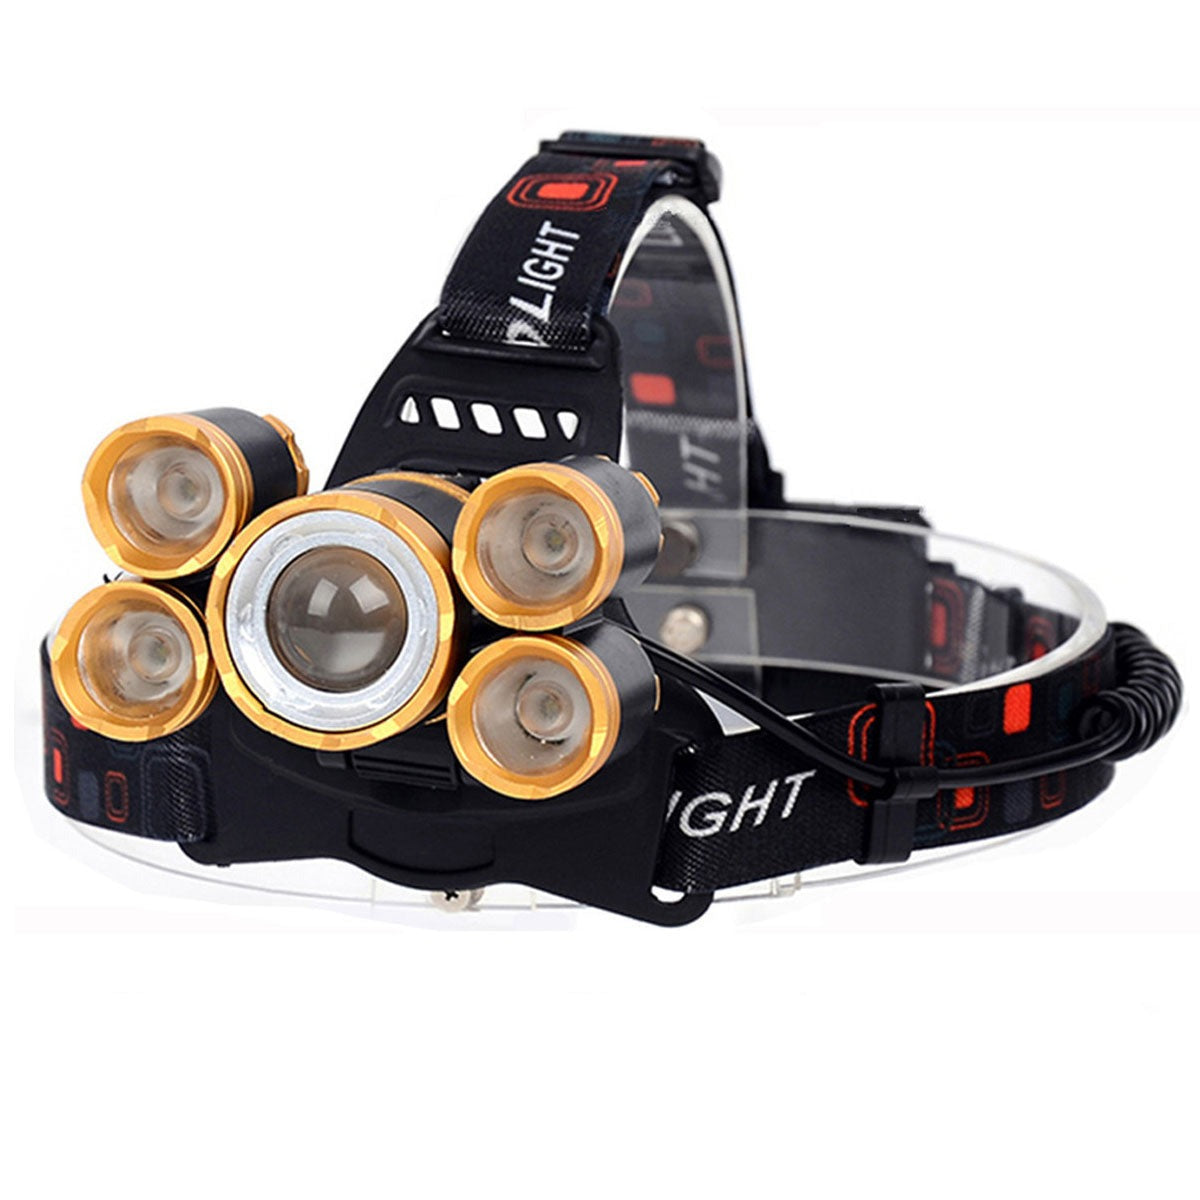 MANIKO™ 1500LM LED Rechargeable Headlamp